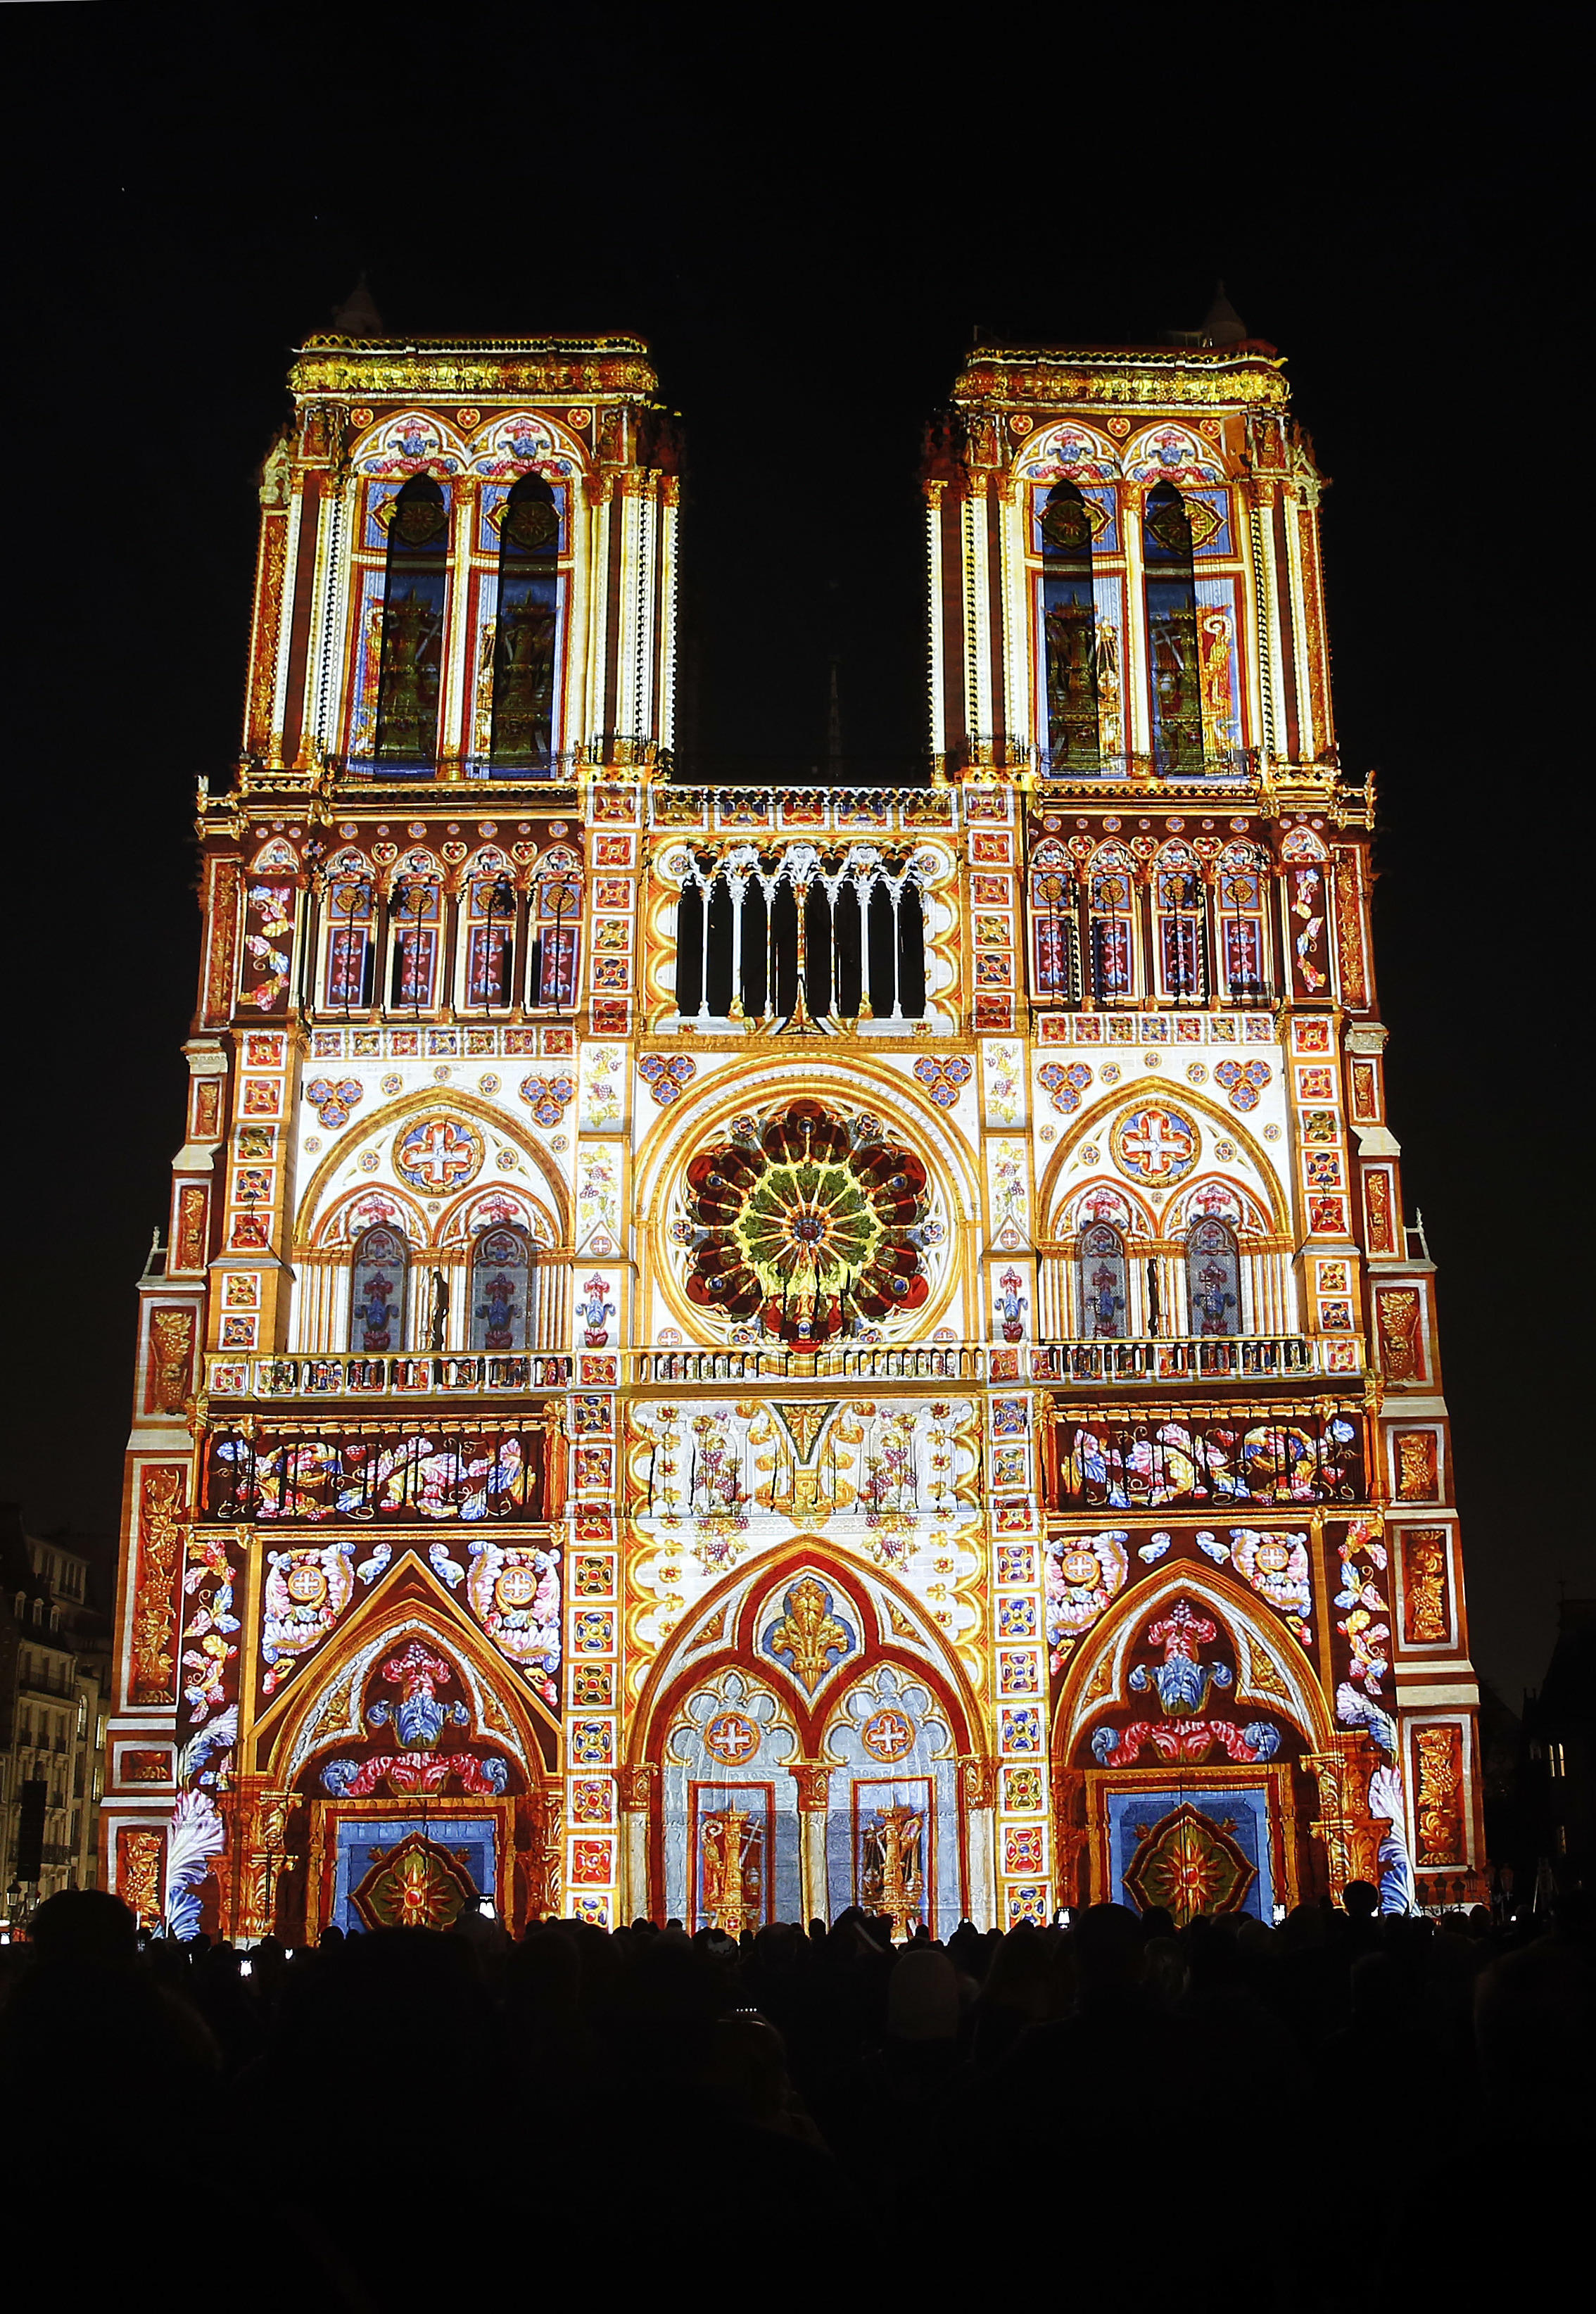 Spectacular Light Show At Notre Dame Cathedral Commemorates World War I